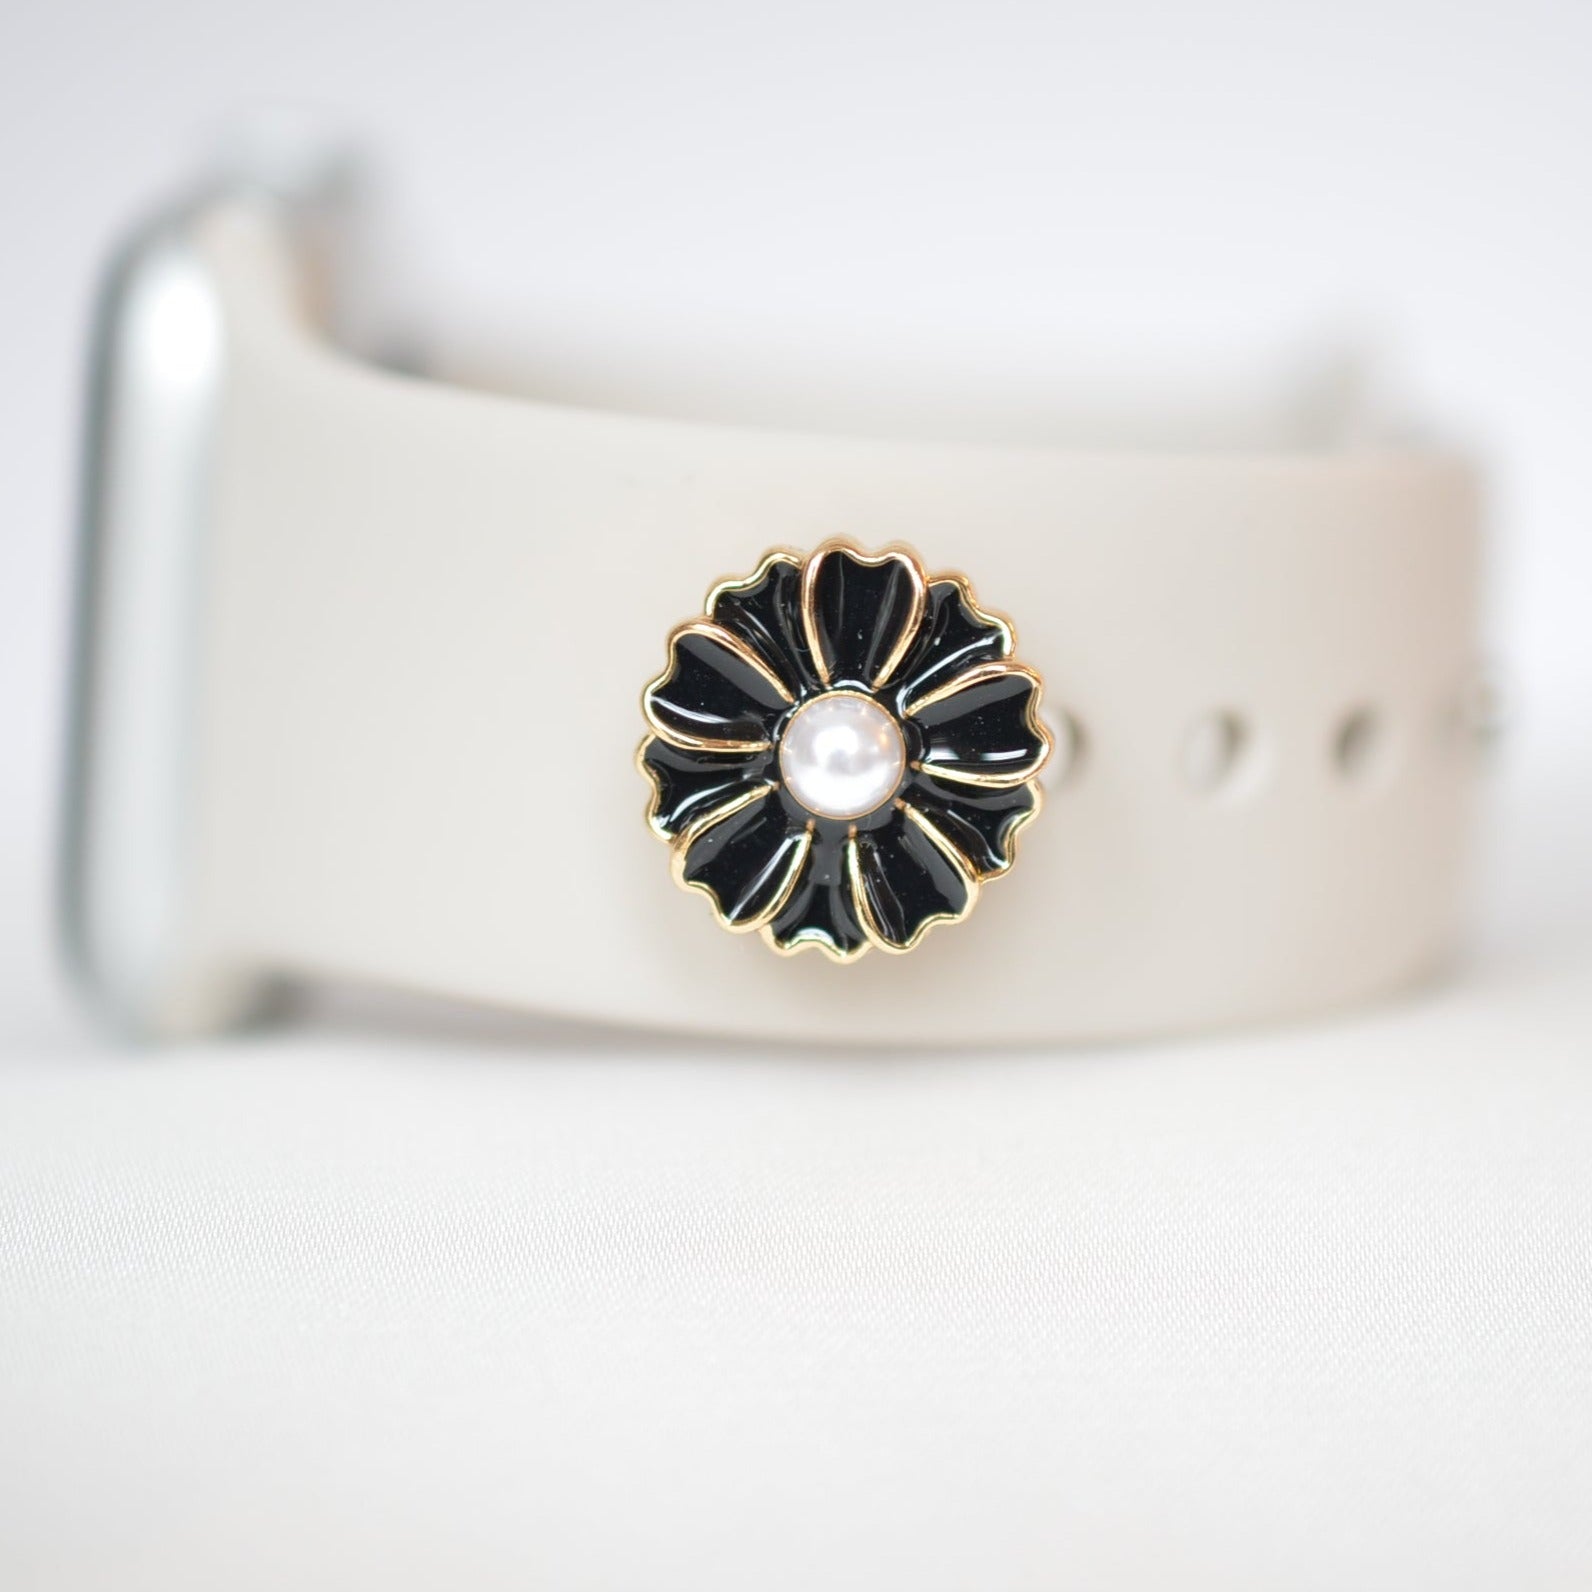 Black Flower with Pearl Stone for Belts, Bags and Watch Bands